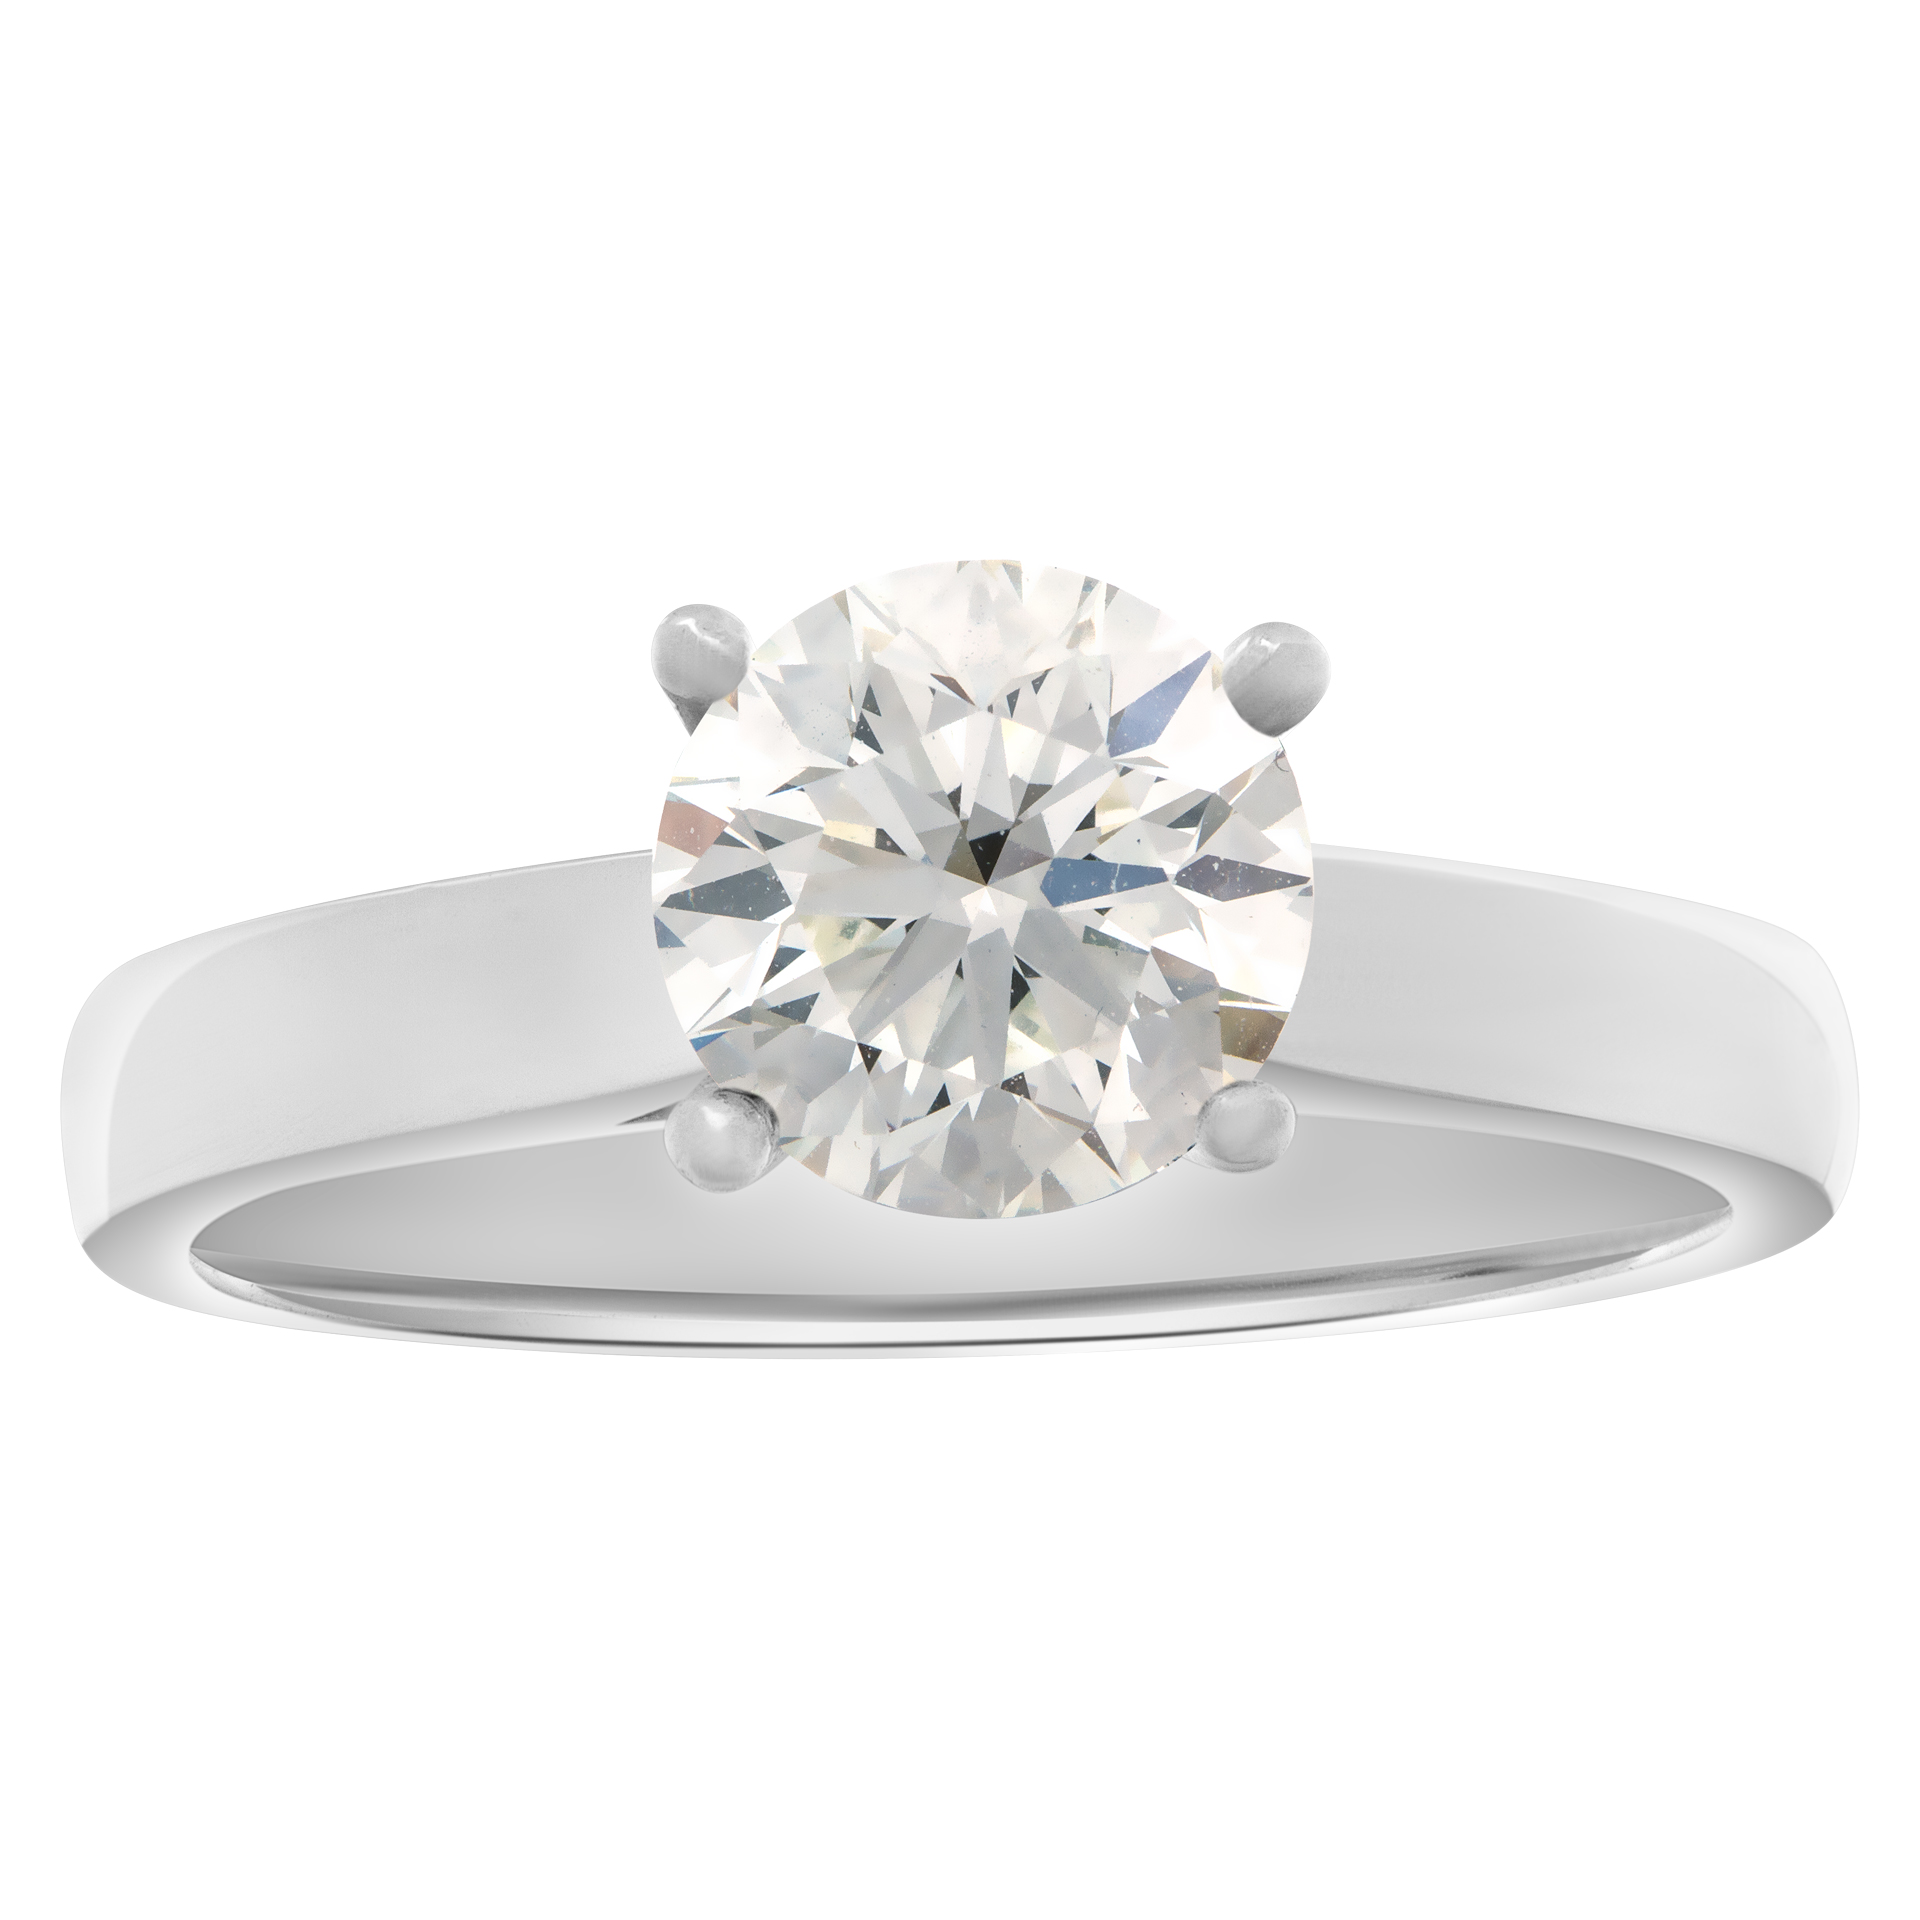 GIA certified round brilliant cut 1.13 carat (I color, VVS2 clarity, Excellent polish) ring image 1